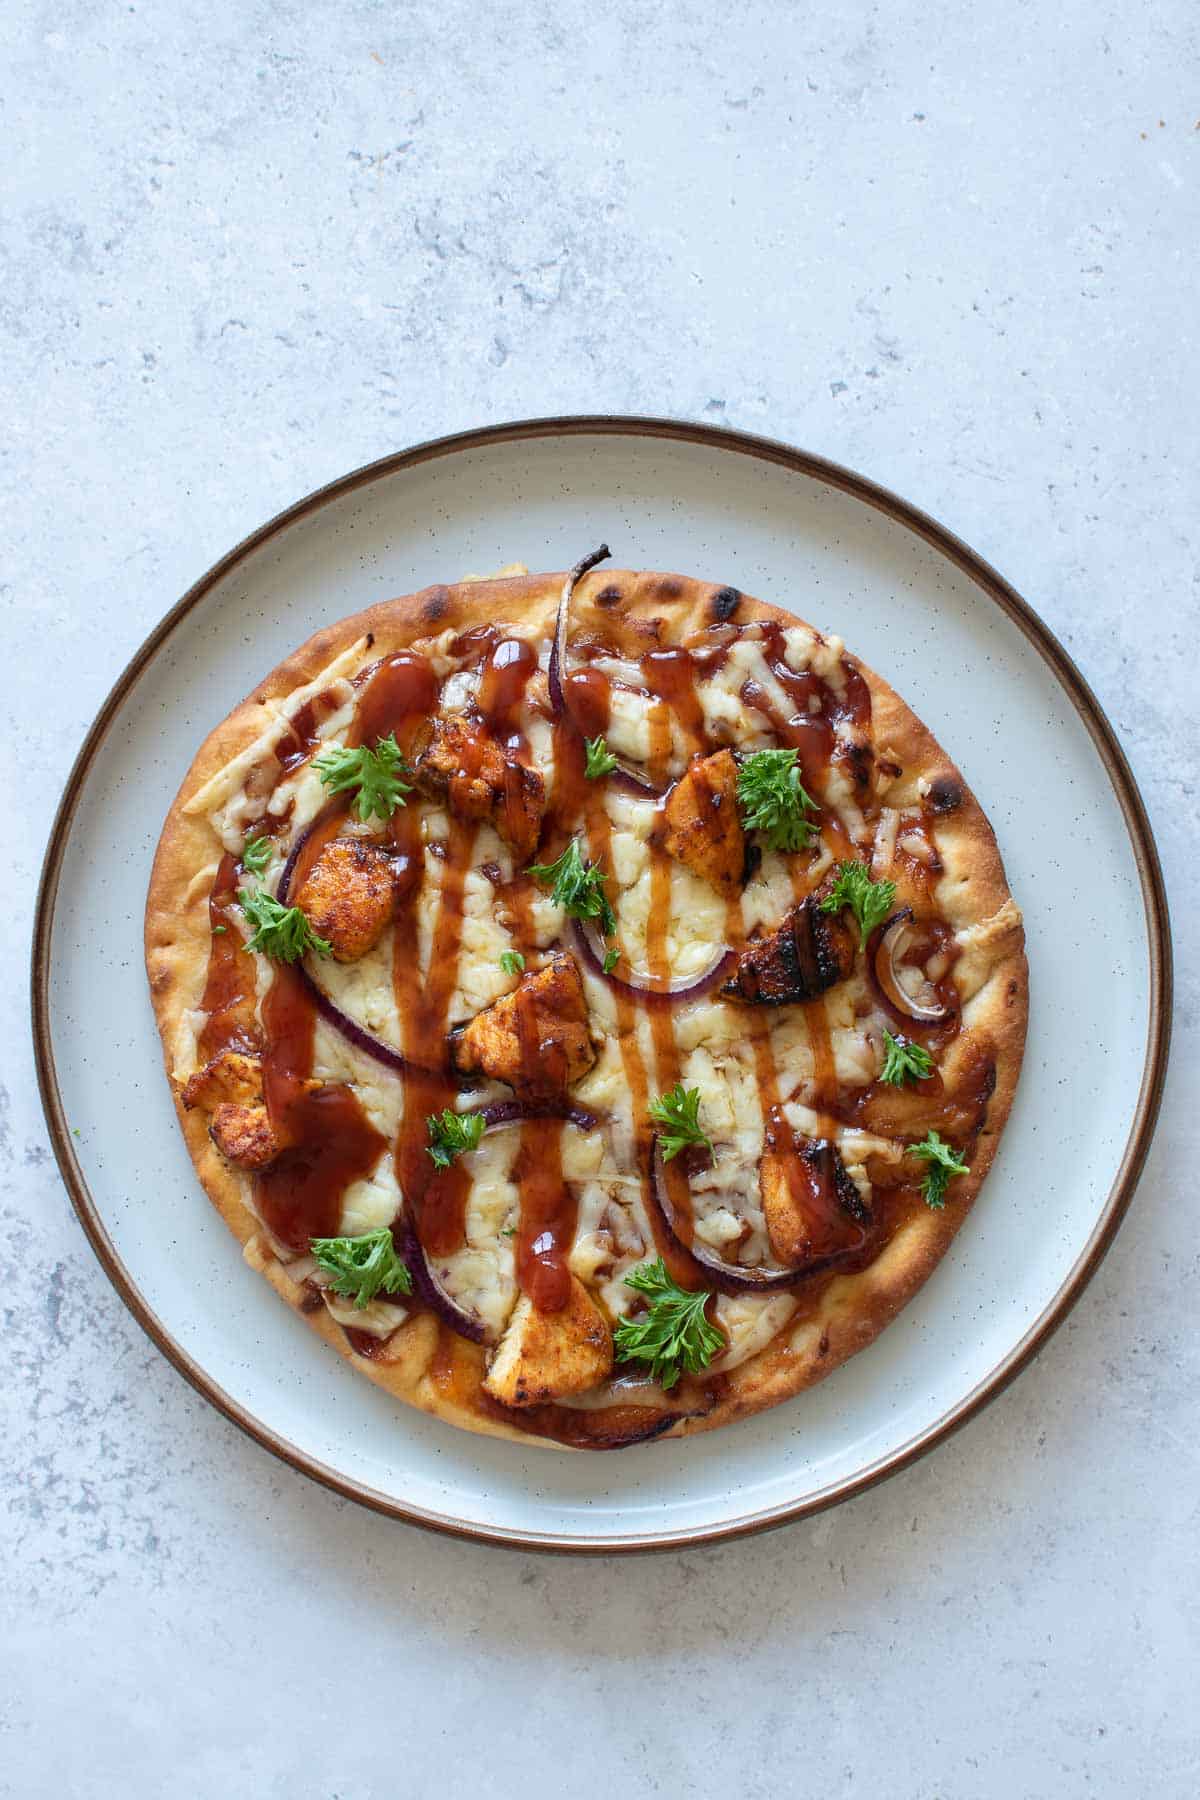 Flatbread with cheddar, chicken and BBQ sauce.